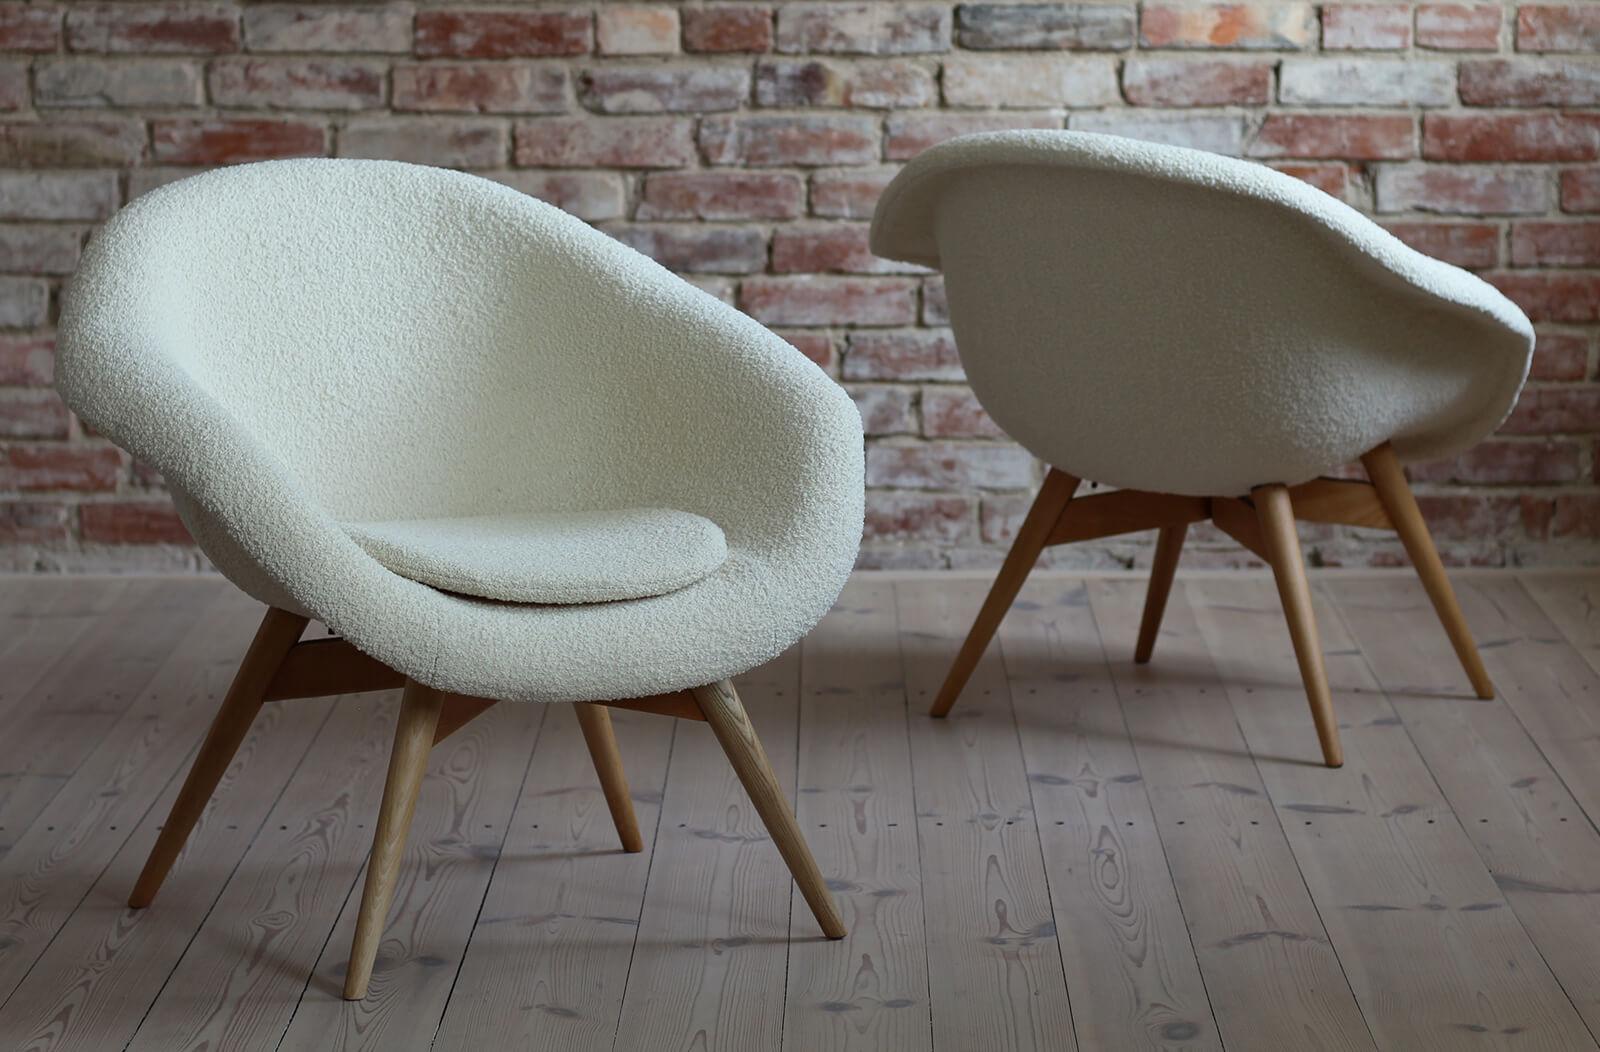 Mid-20th Century Set of 2 Lounge Chairs Designed by Miroslav Navrátil, 1950s, Czech Republic For Sale